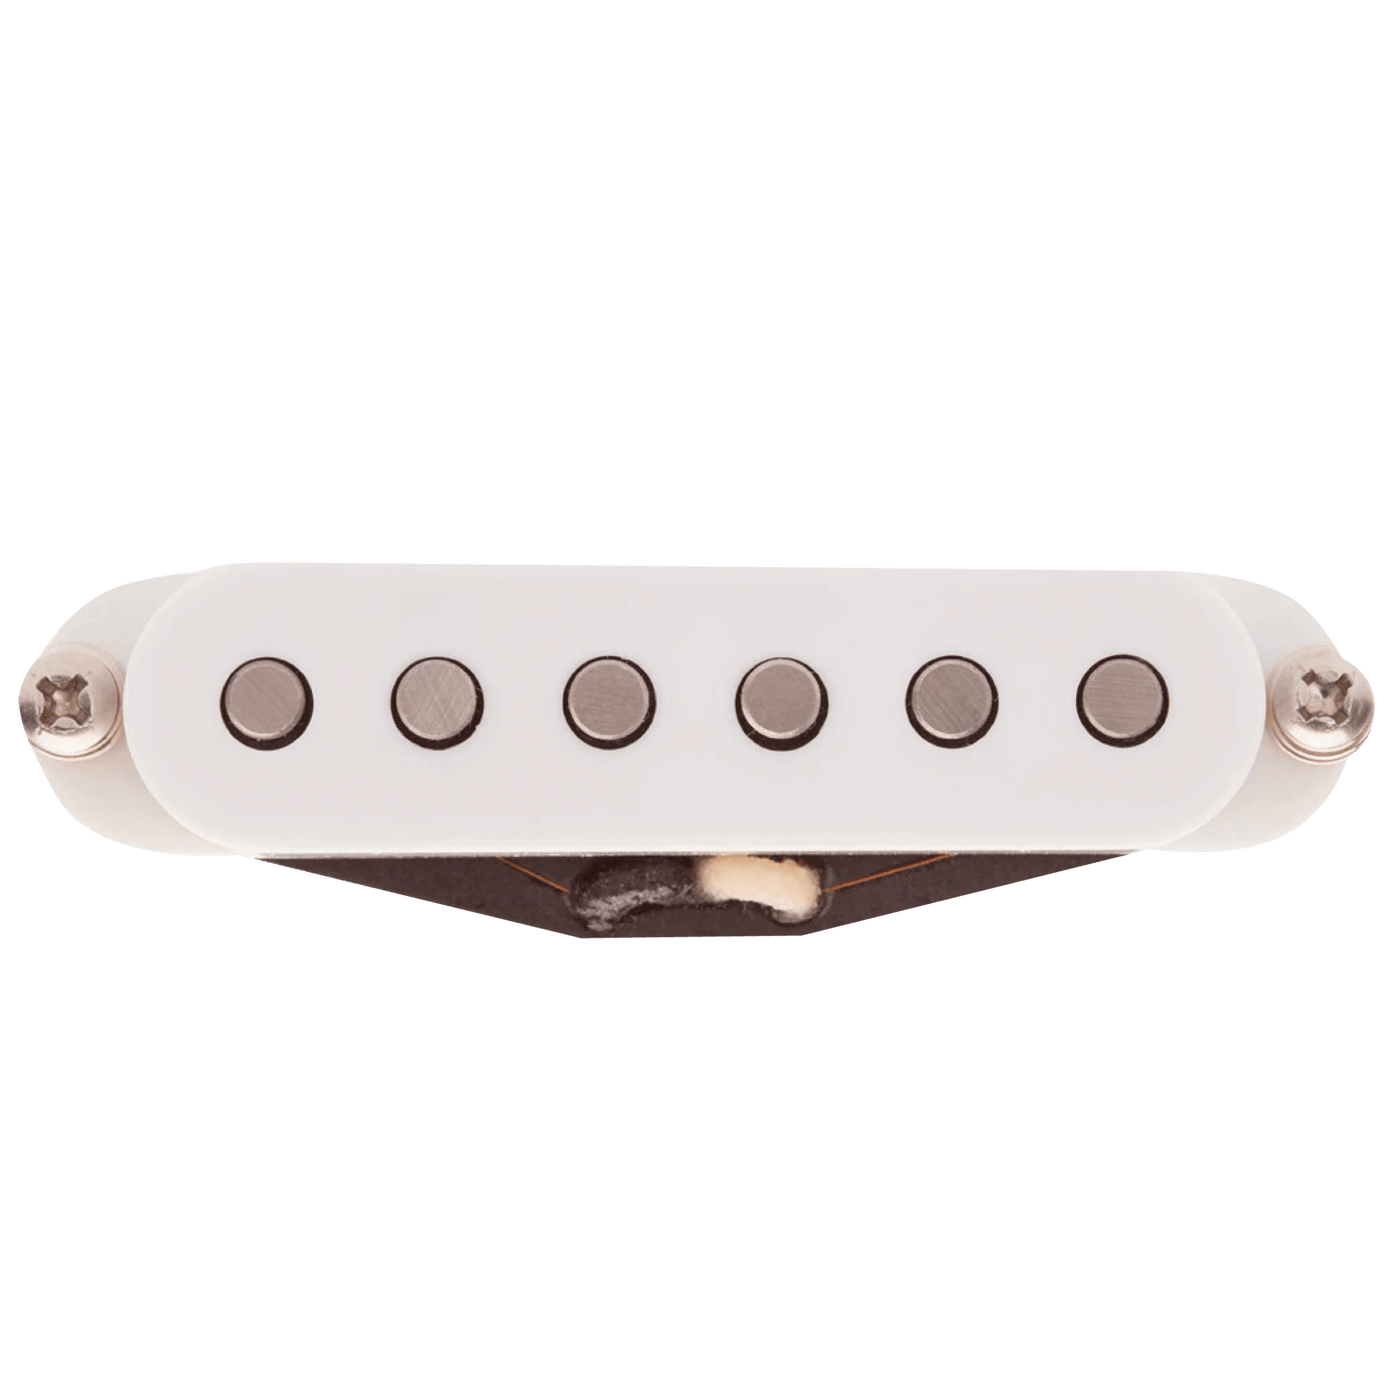 Suhr V60LP White (Bridge) - $129990 - Gearhub - The V60 and V60LP pickups faithfully recreate the classic single-coil sounds of the 60’s. These pickups also use the same magnets that were used in the pickups made during this era. What you get are clear bell-like highs, warm and punchy mids, and big yet firm lows that are the hallmark of great vintage pickups.The V60LP pickup is wound using a proprietary winding process that replicates the hand-wound pattern of some early-60’s single-coil pickups which have